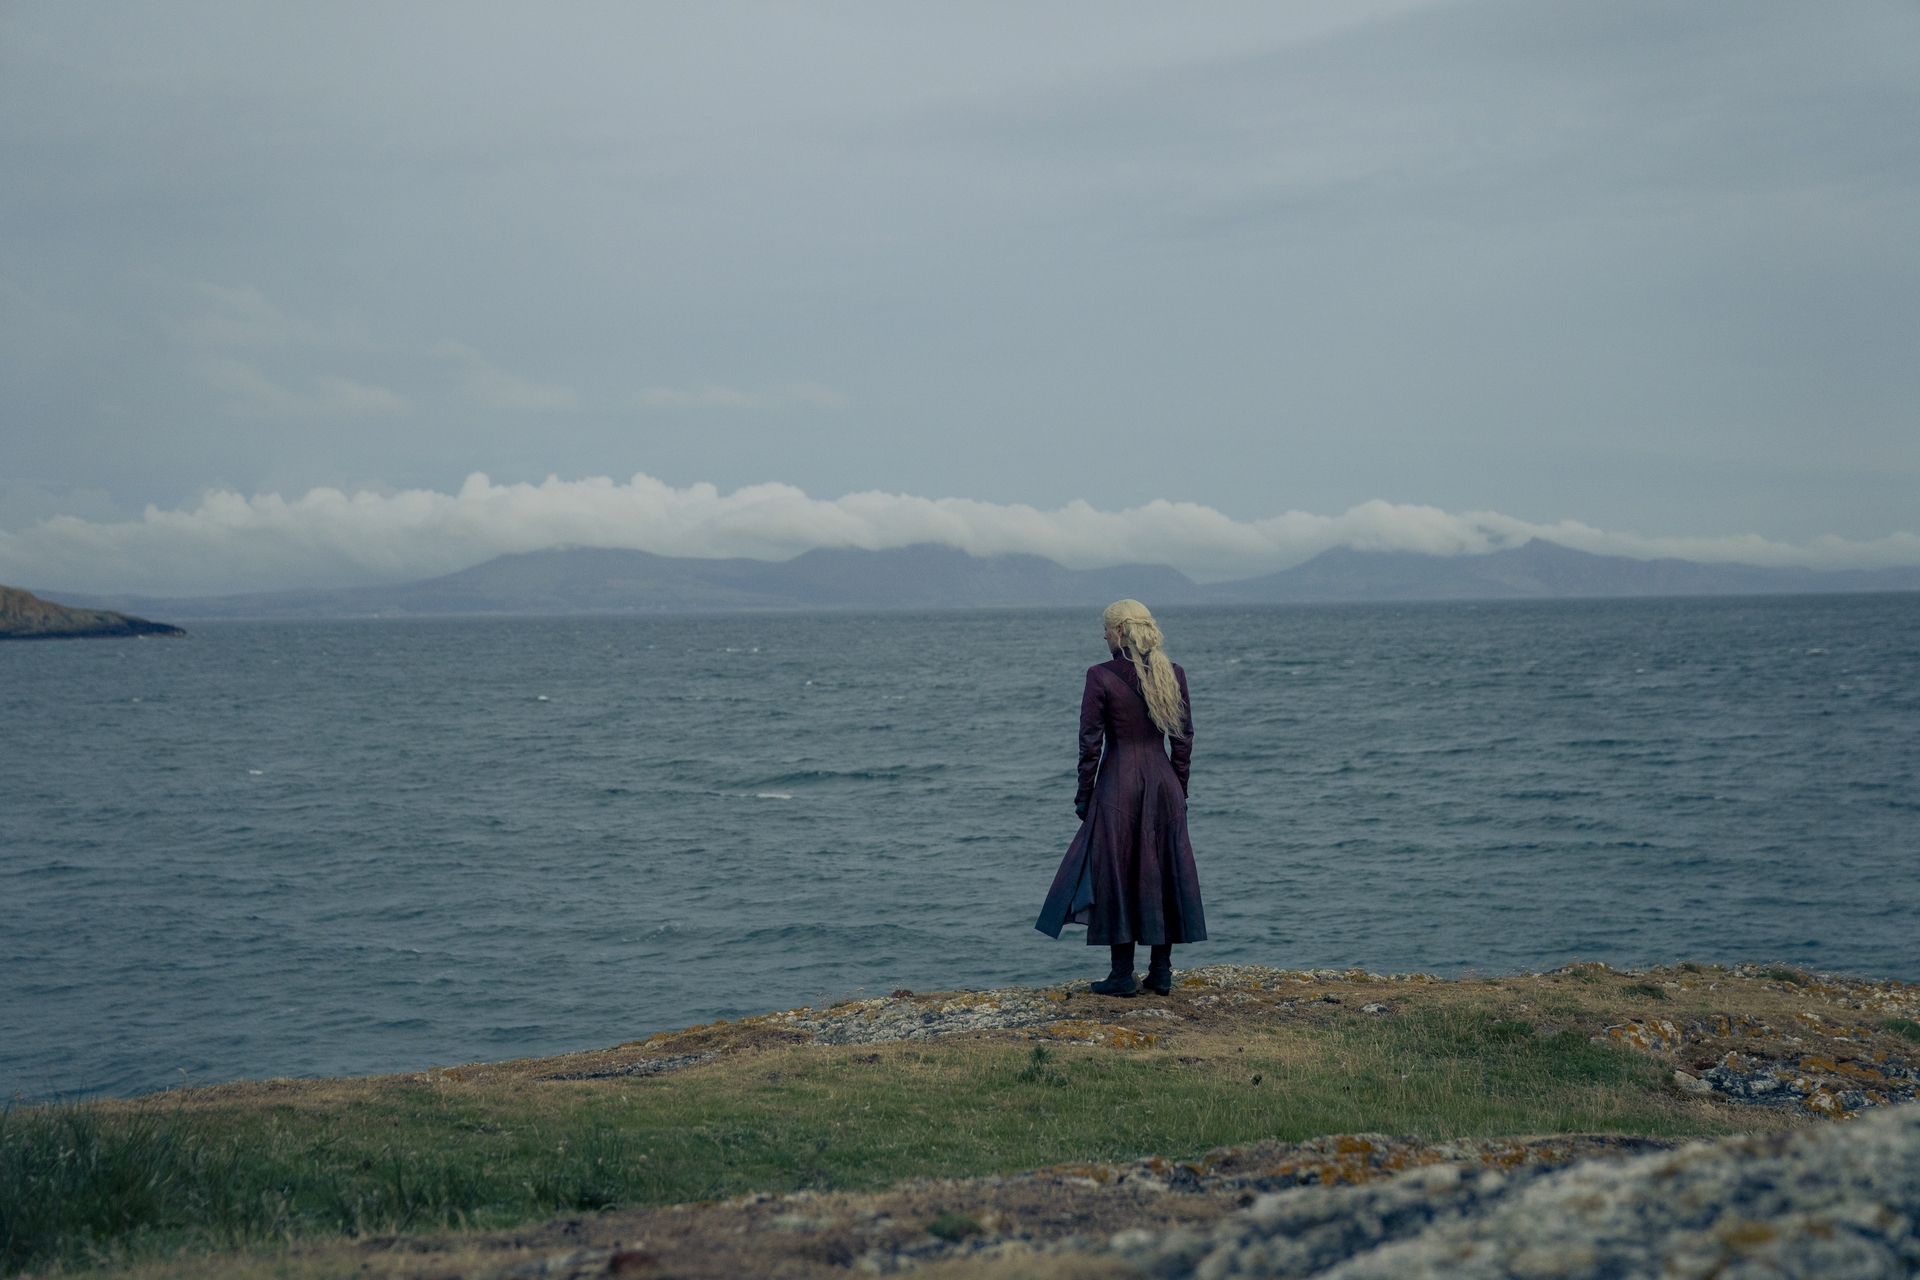 Rhaenyra standing on a cliff in a still from House of the Dragon season 2 episode 1